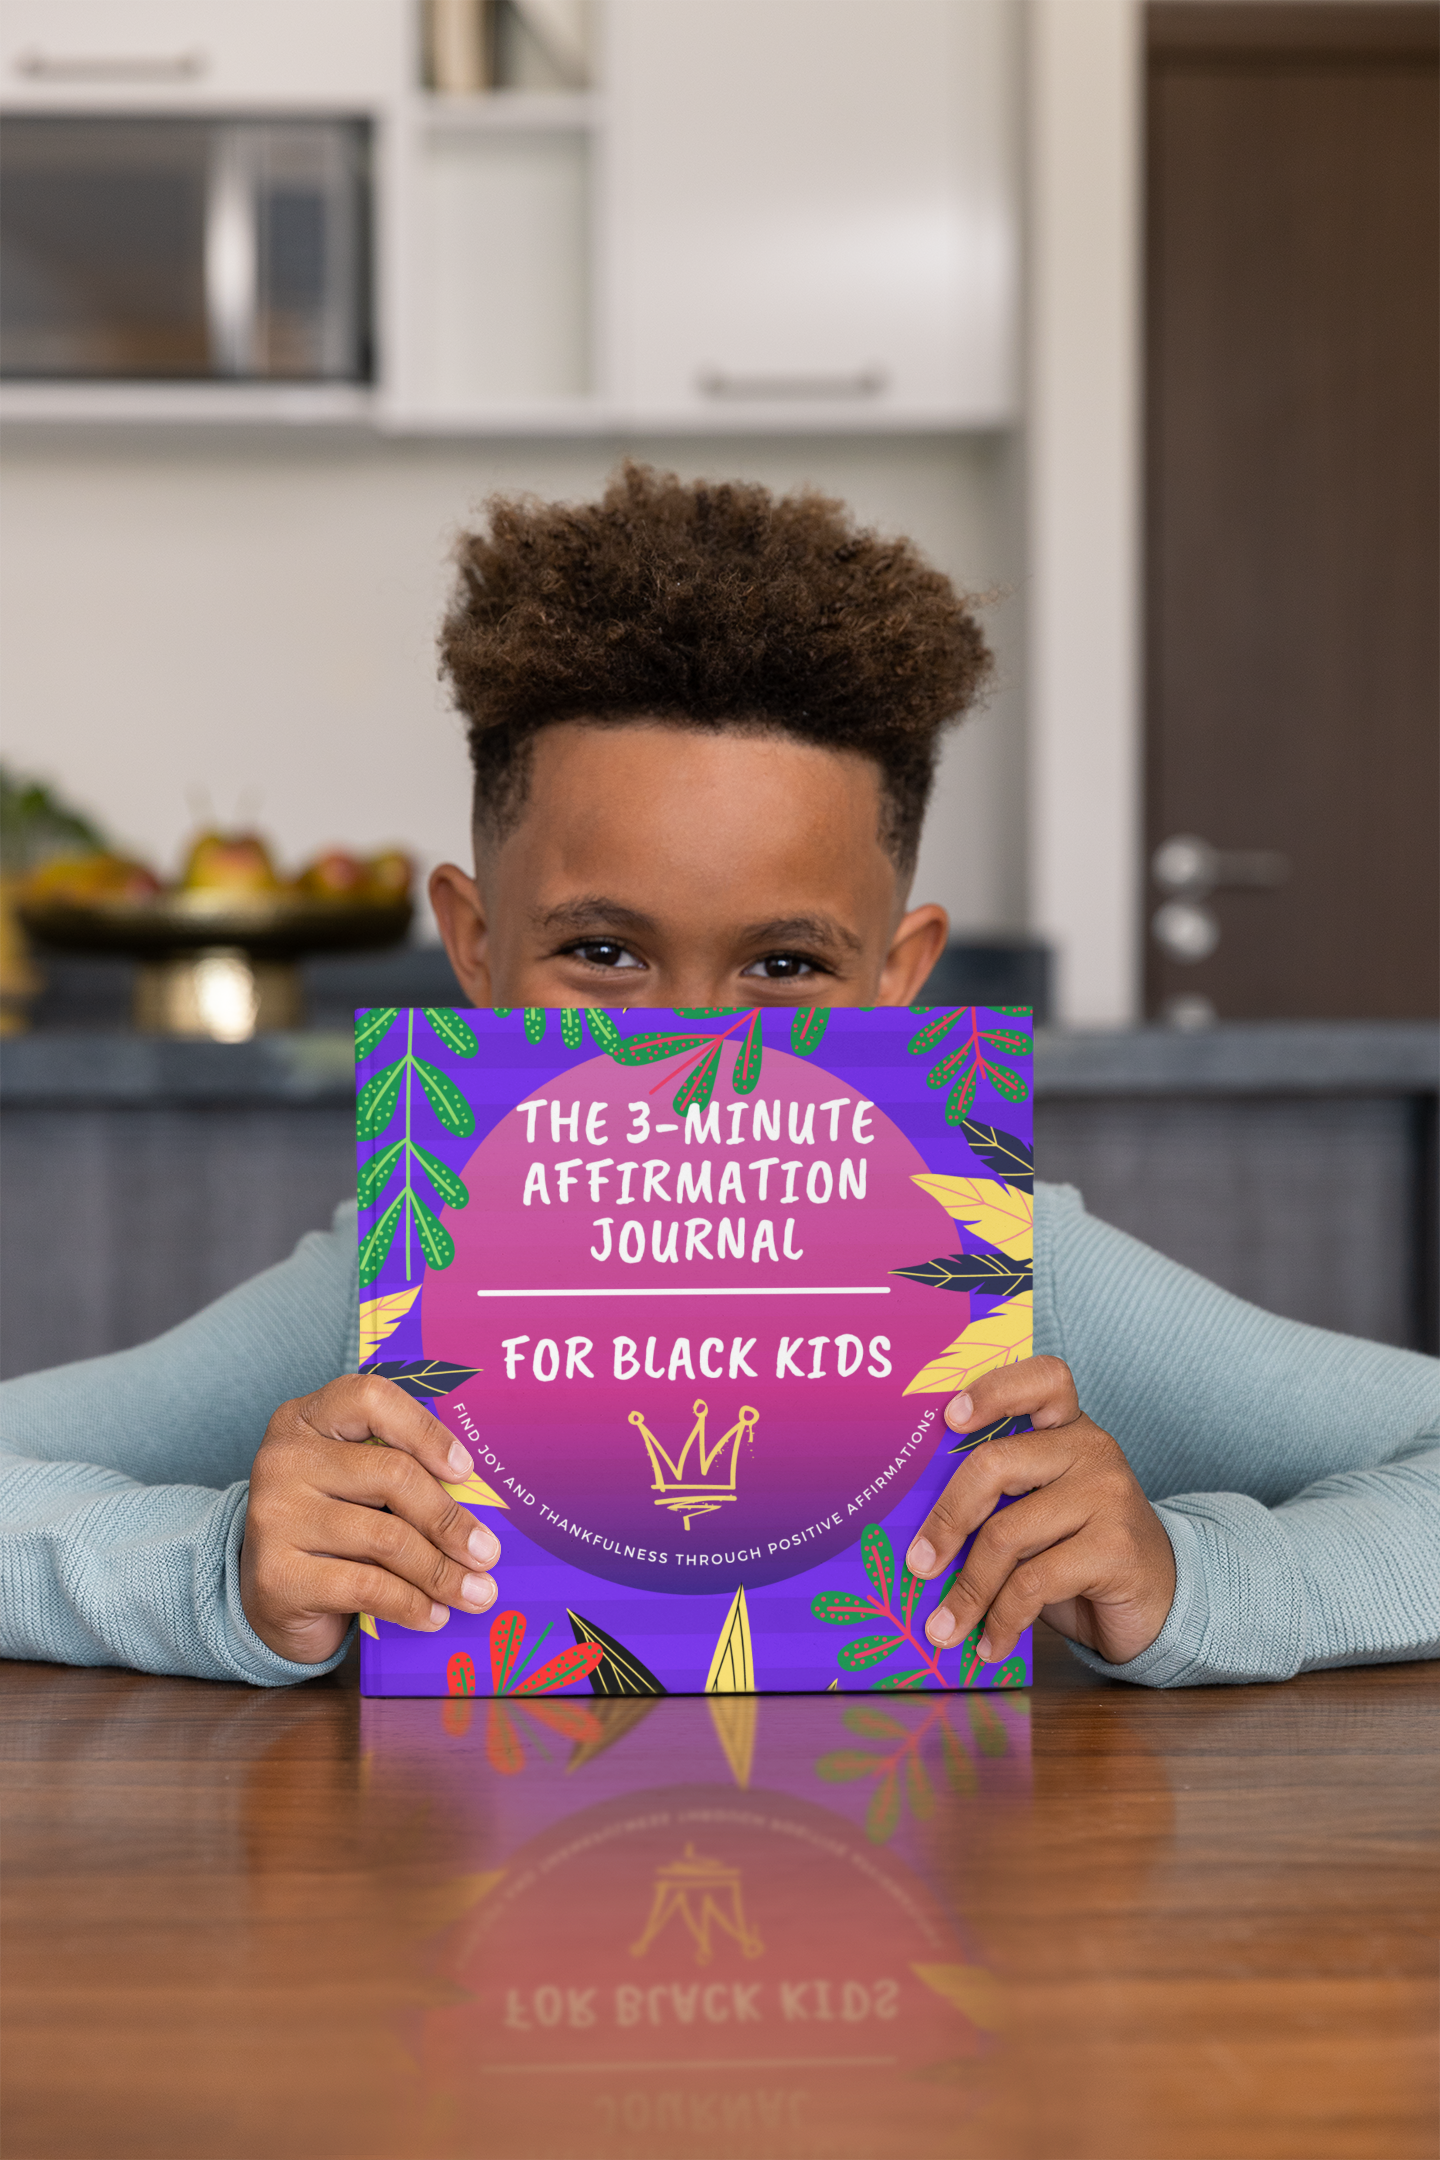 The 3 Minute Affirmation Journal For Black Kids by Ukay Ekong